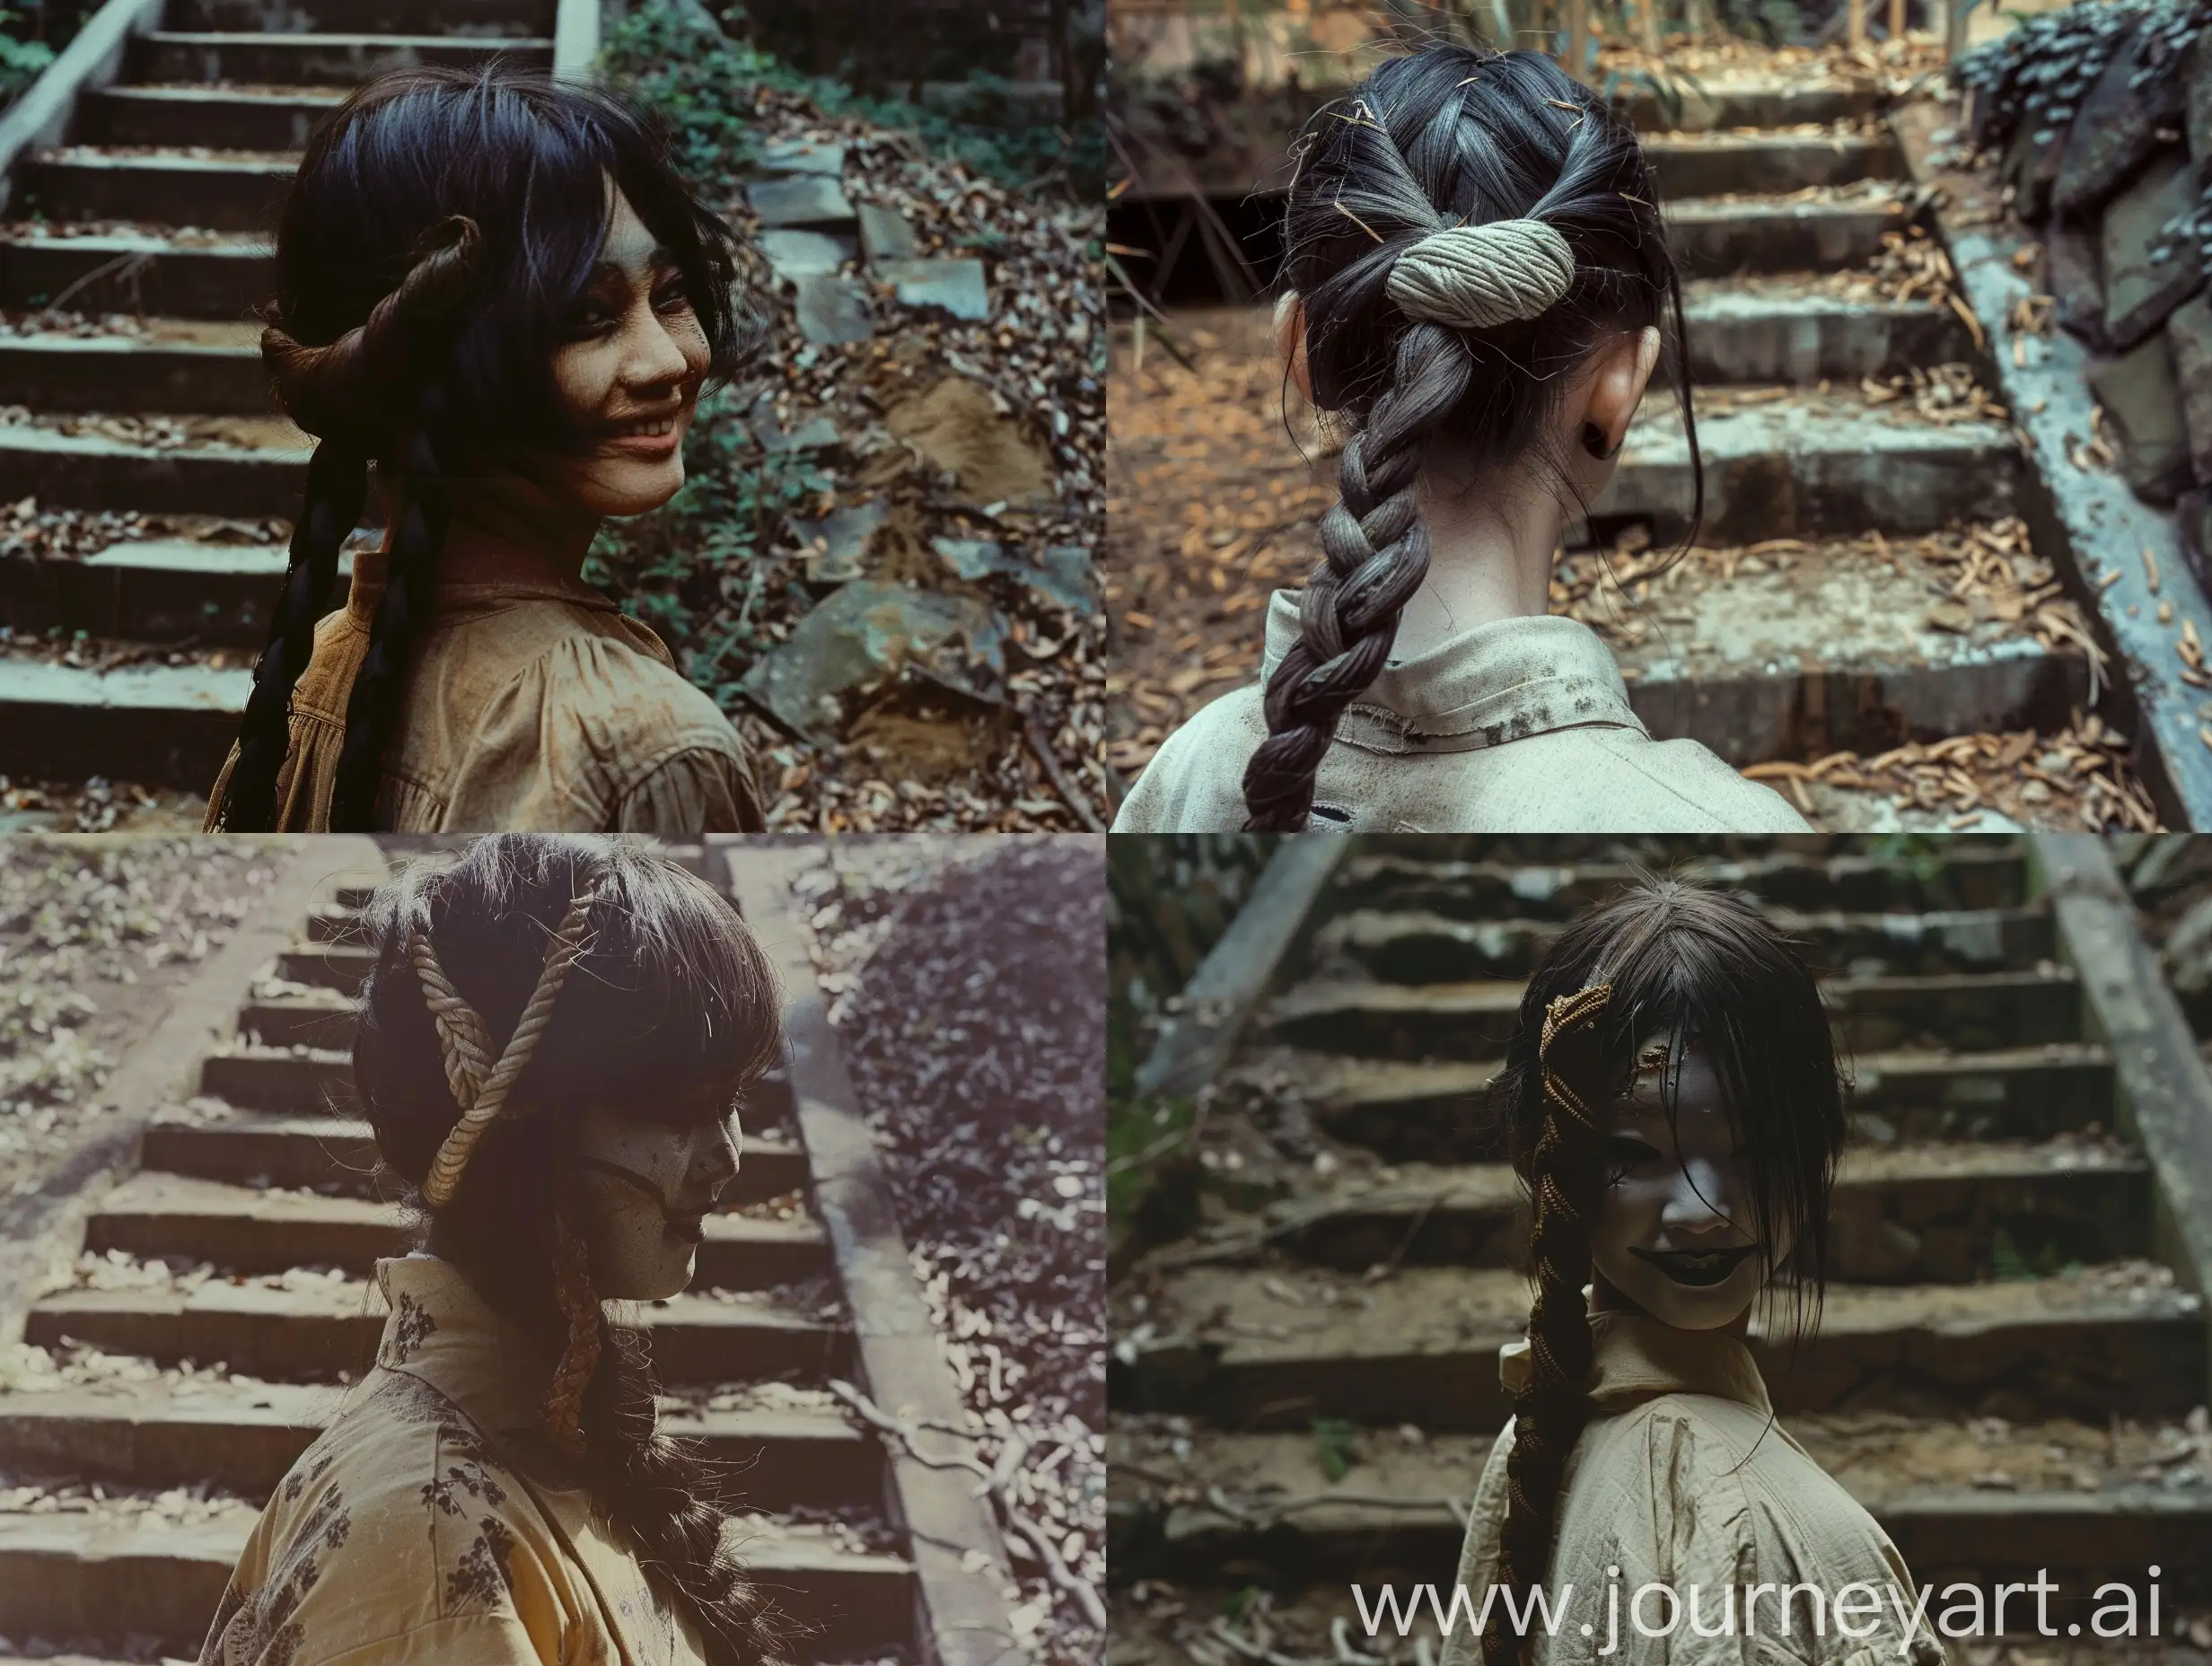 Yokai-Girl-with-Knotted-Braid-Eerie-Presence-in-University-Gardens-Back-Stairs